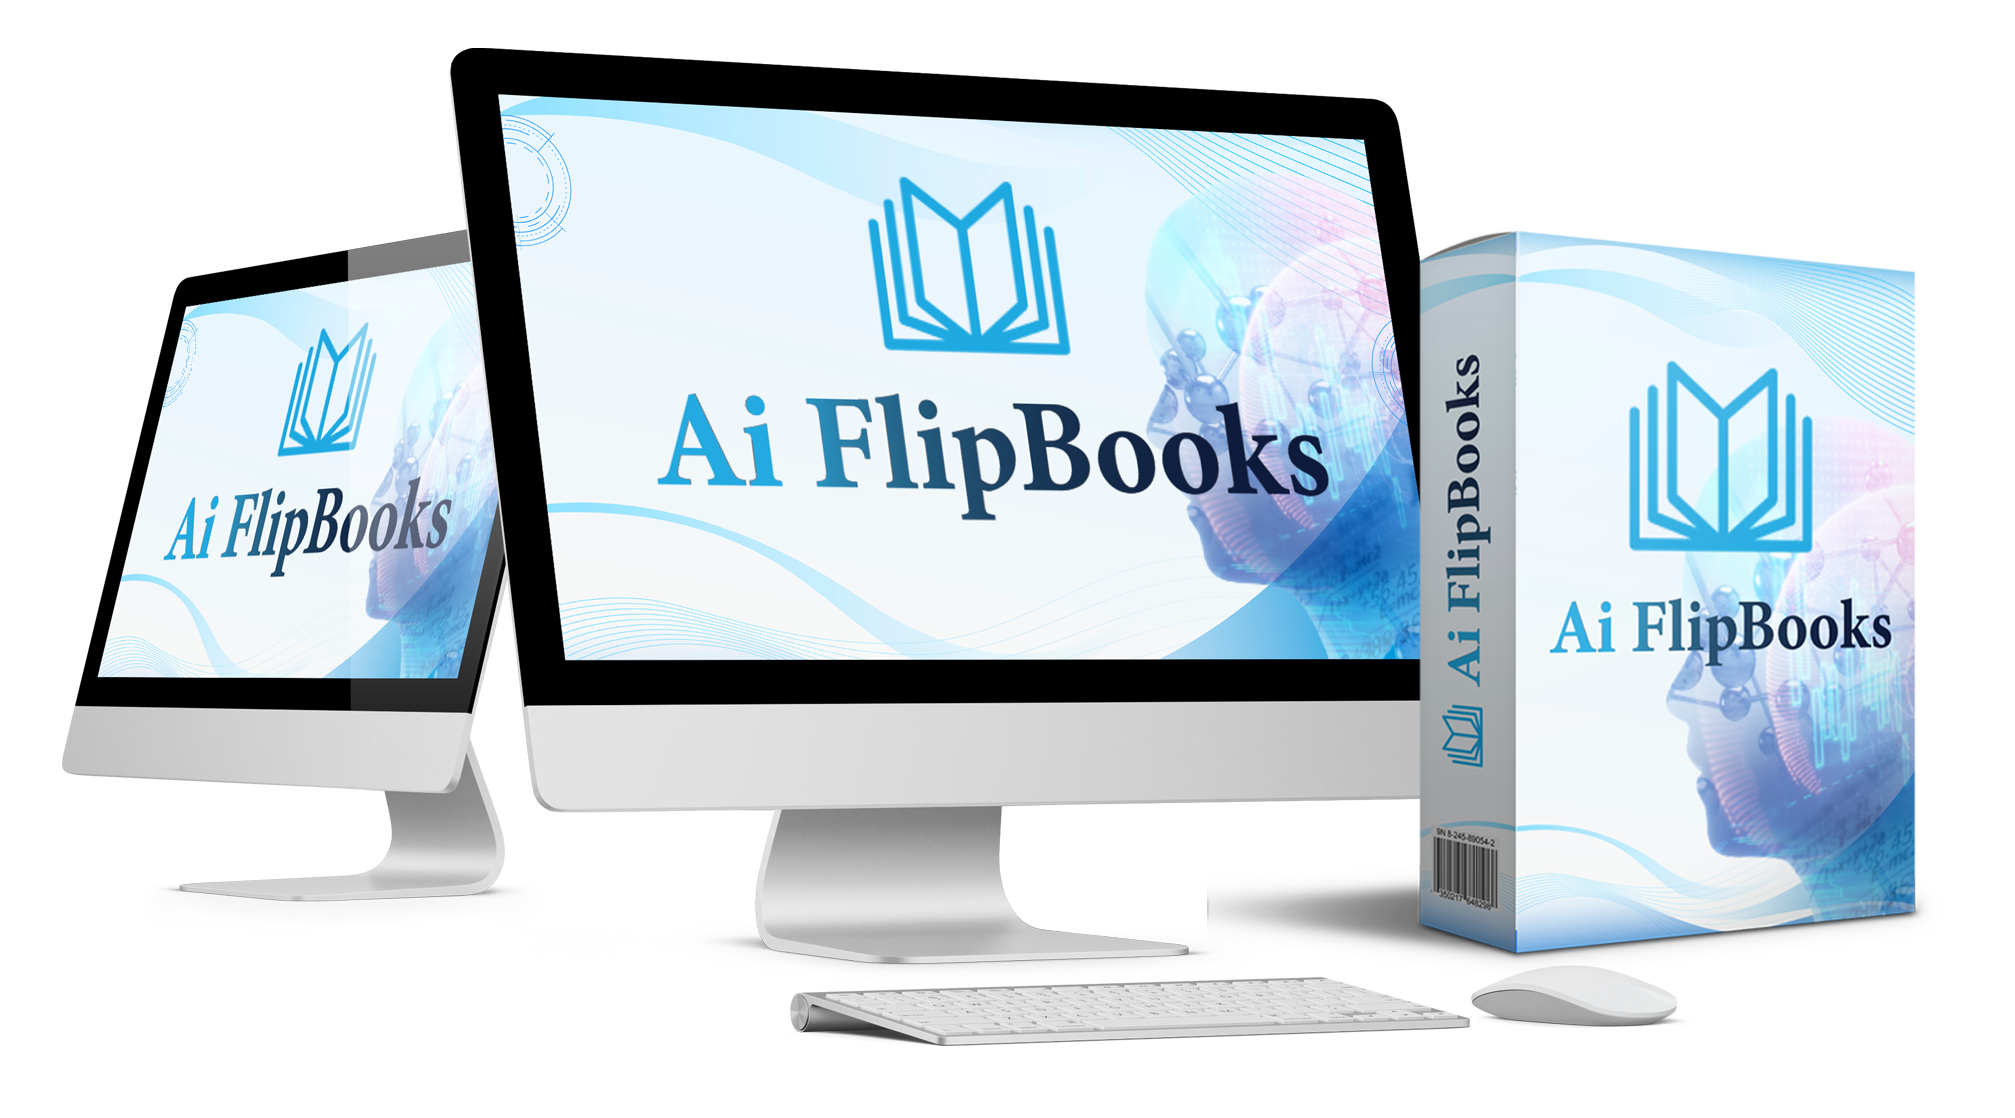 Upgrade to AI FlipBooks and unlock the power of interactive flipbooks and articles. Stand out from your competitors and keep your audience engaged. Get FlipBooks now!